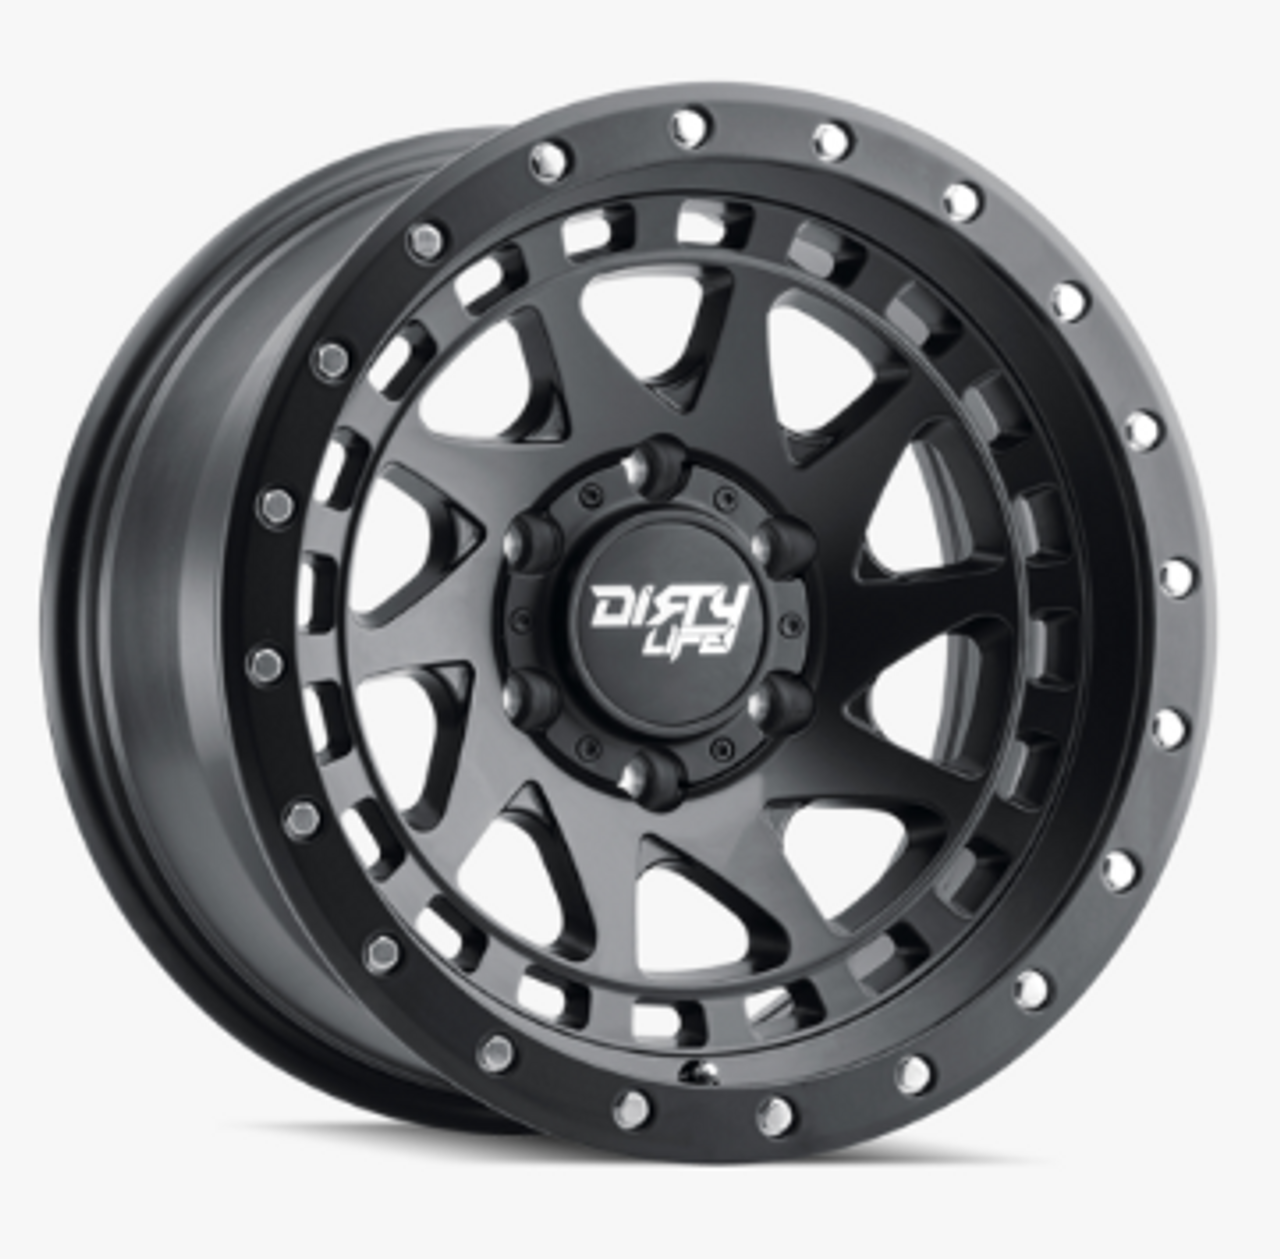 Dirty Life 9311-7936MB12 9311 Enigma Pro Wheel 17x9 5x5 in Matte Black